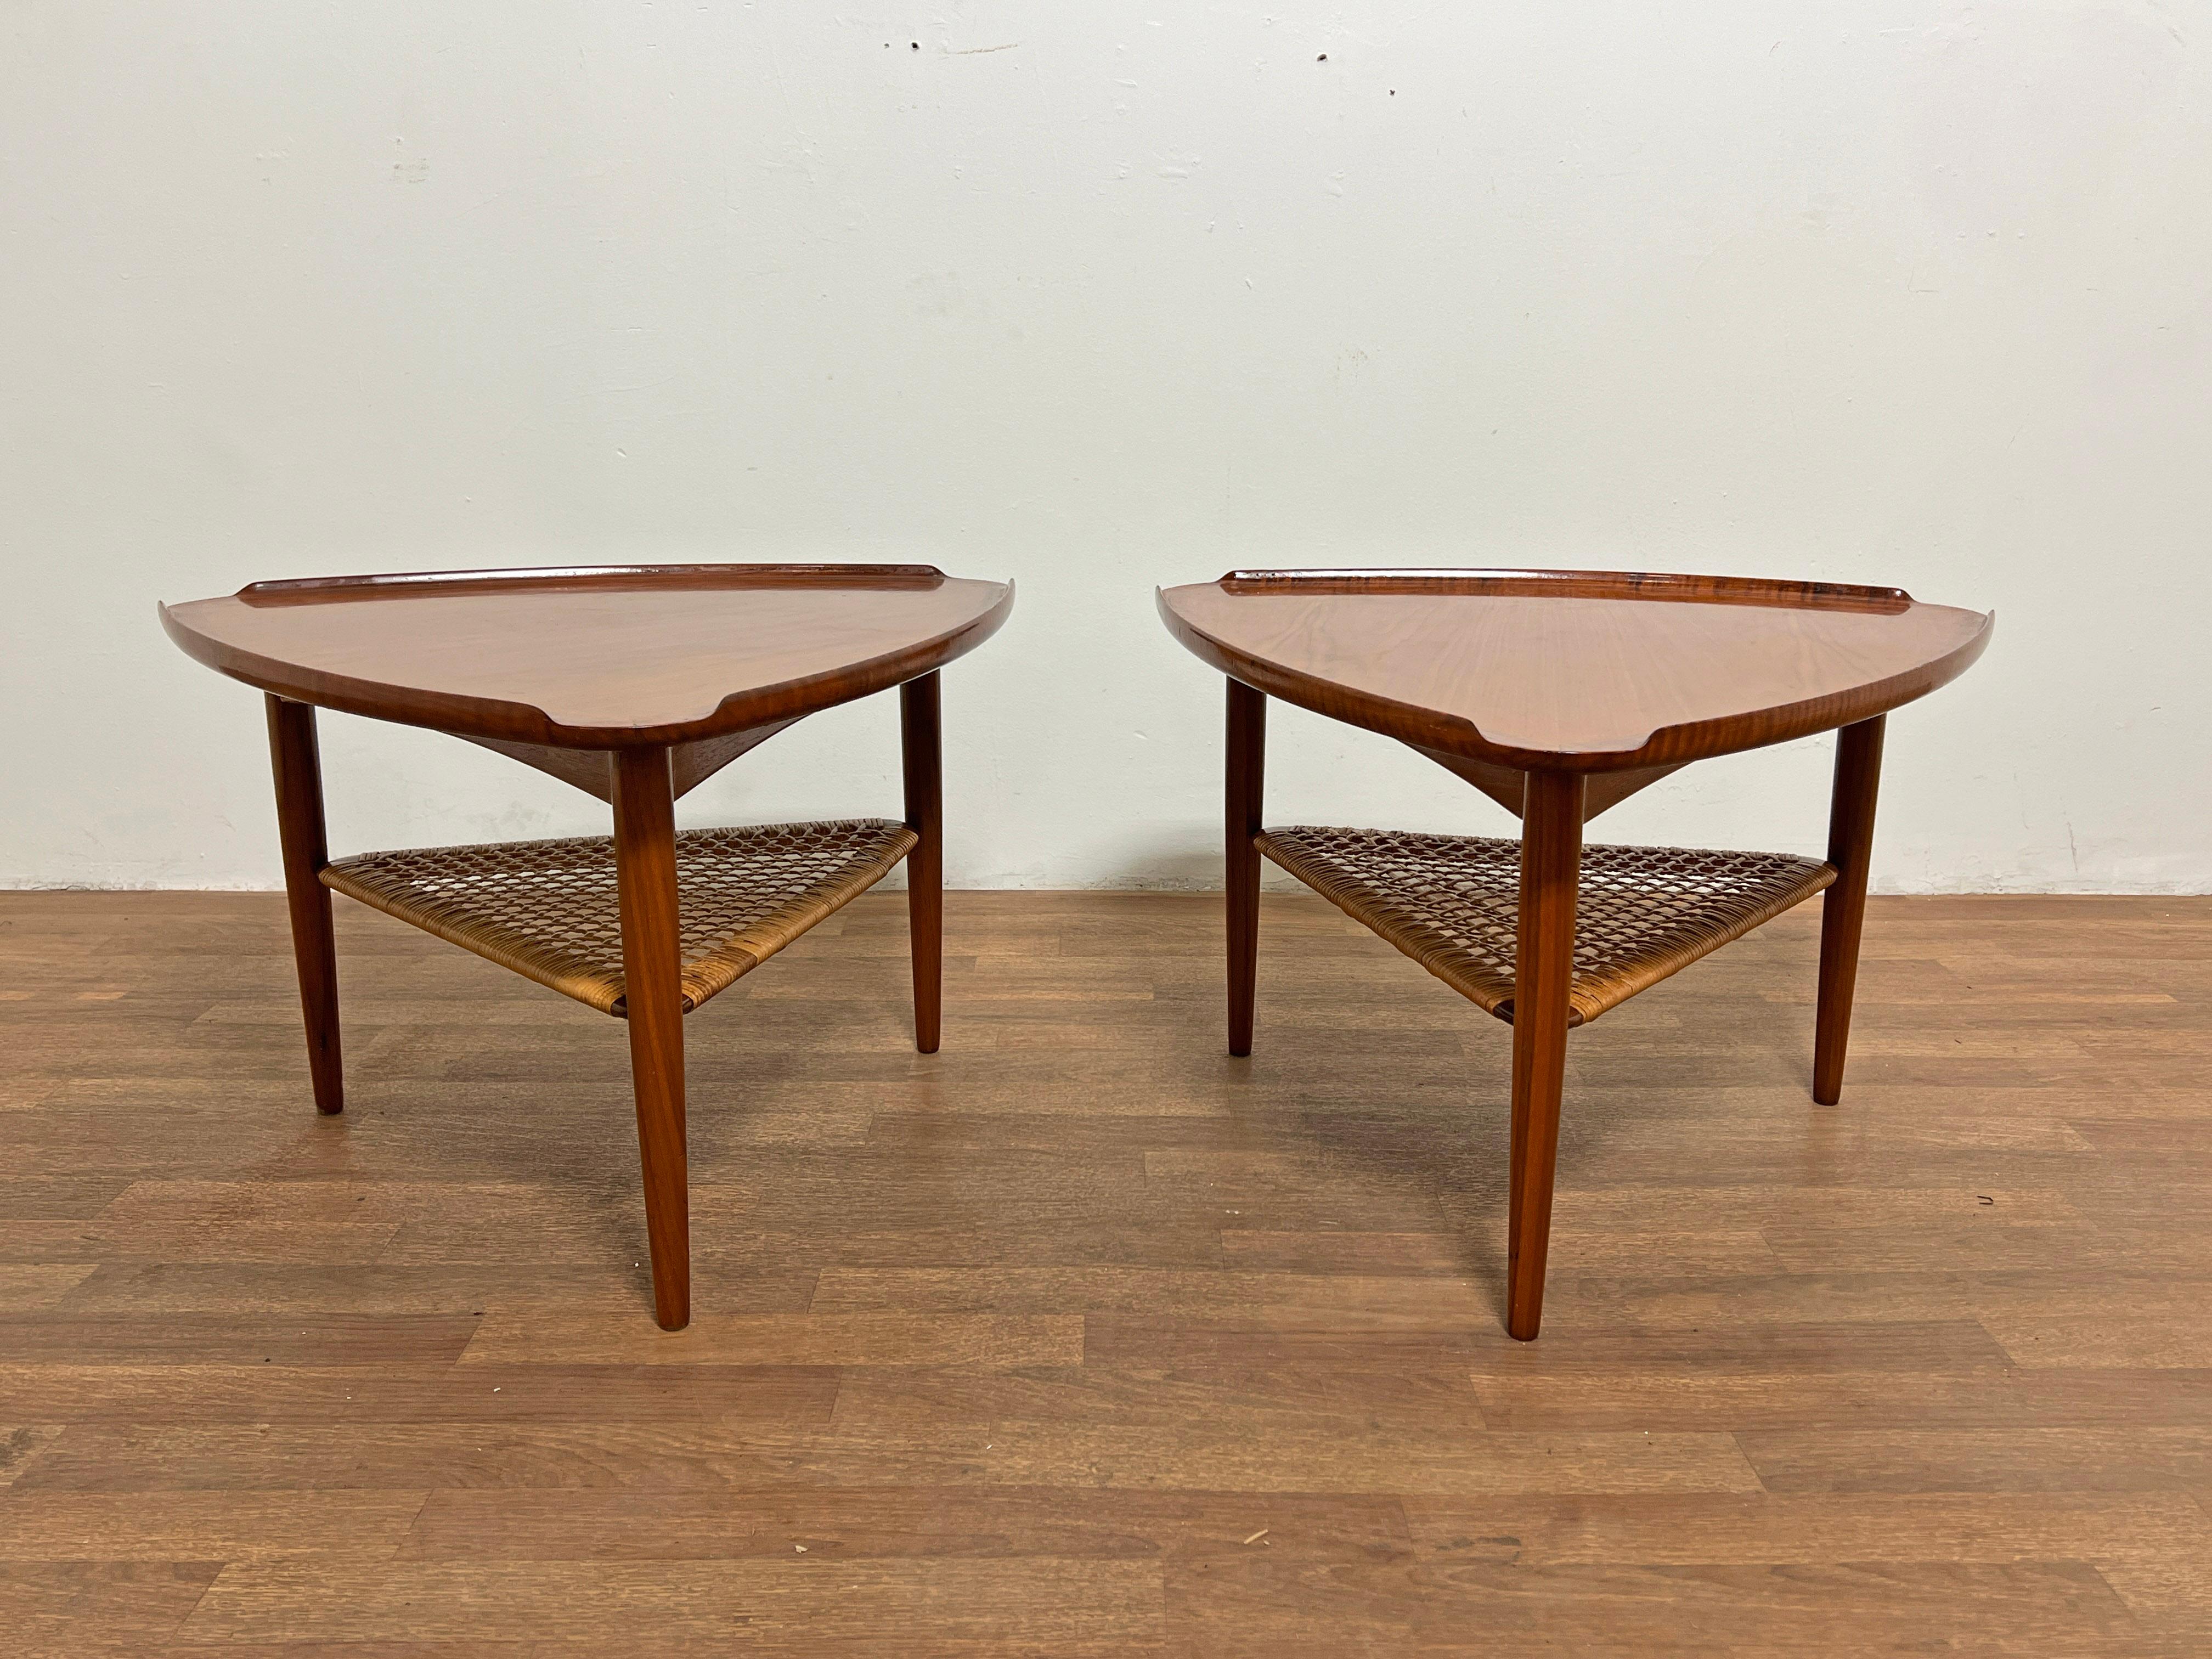 Pair of Poul Jensen for Selig Teak and Cane Tripod Side Tables C. 1960s For Sale 3